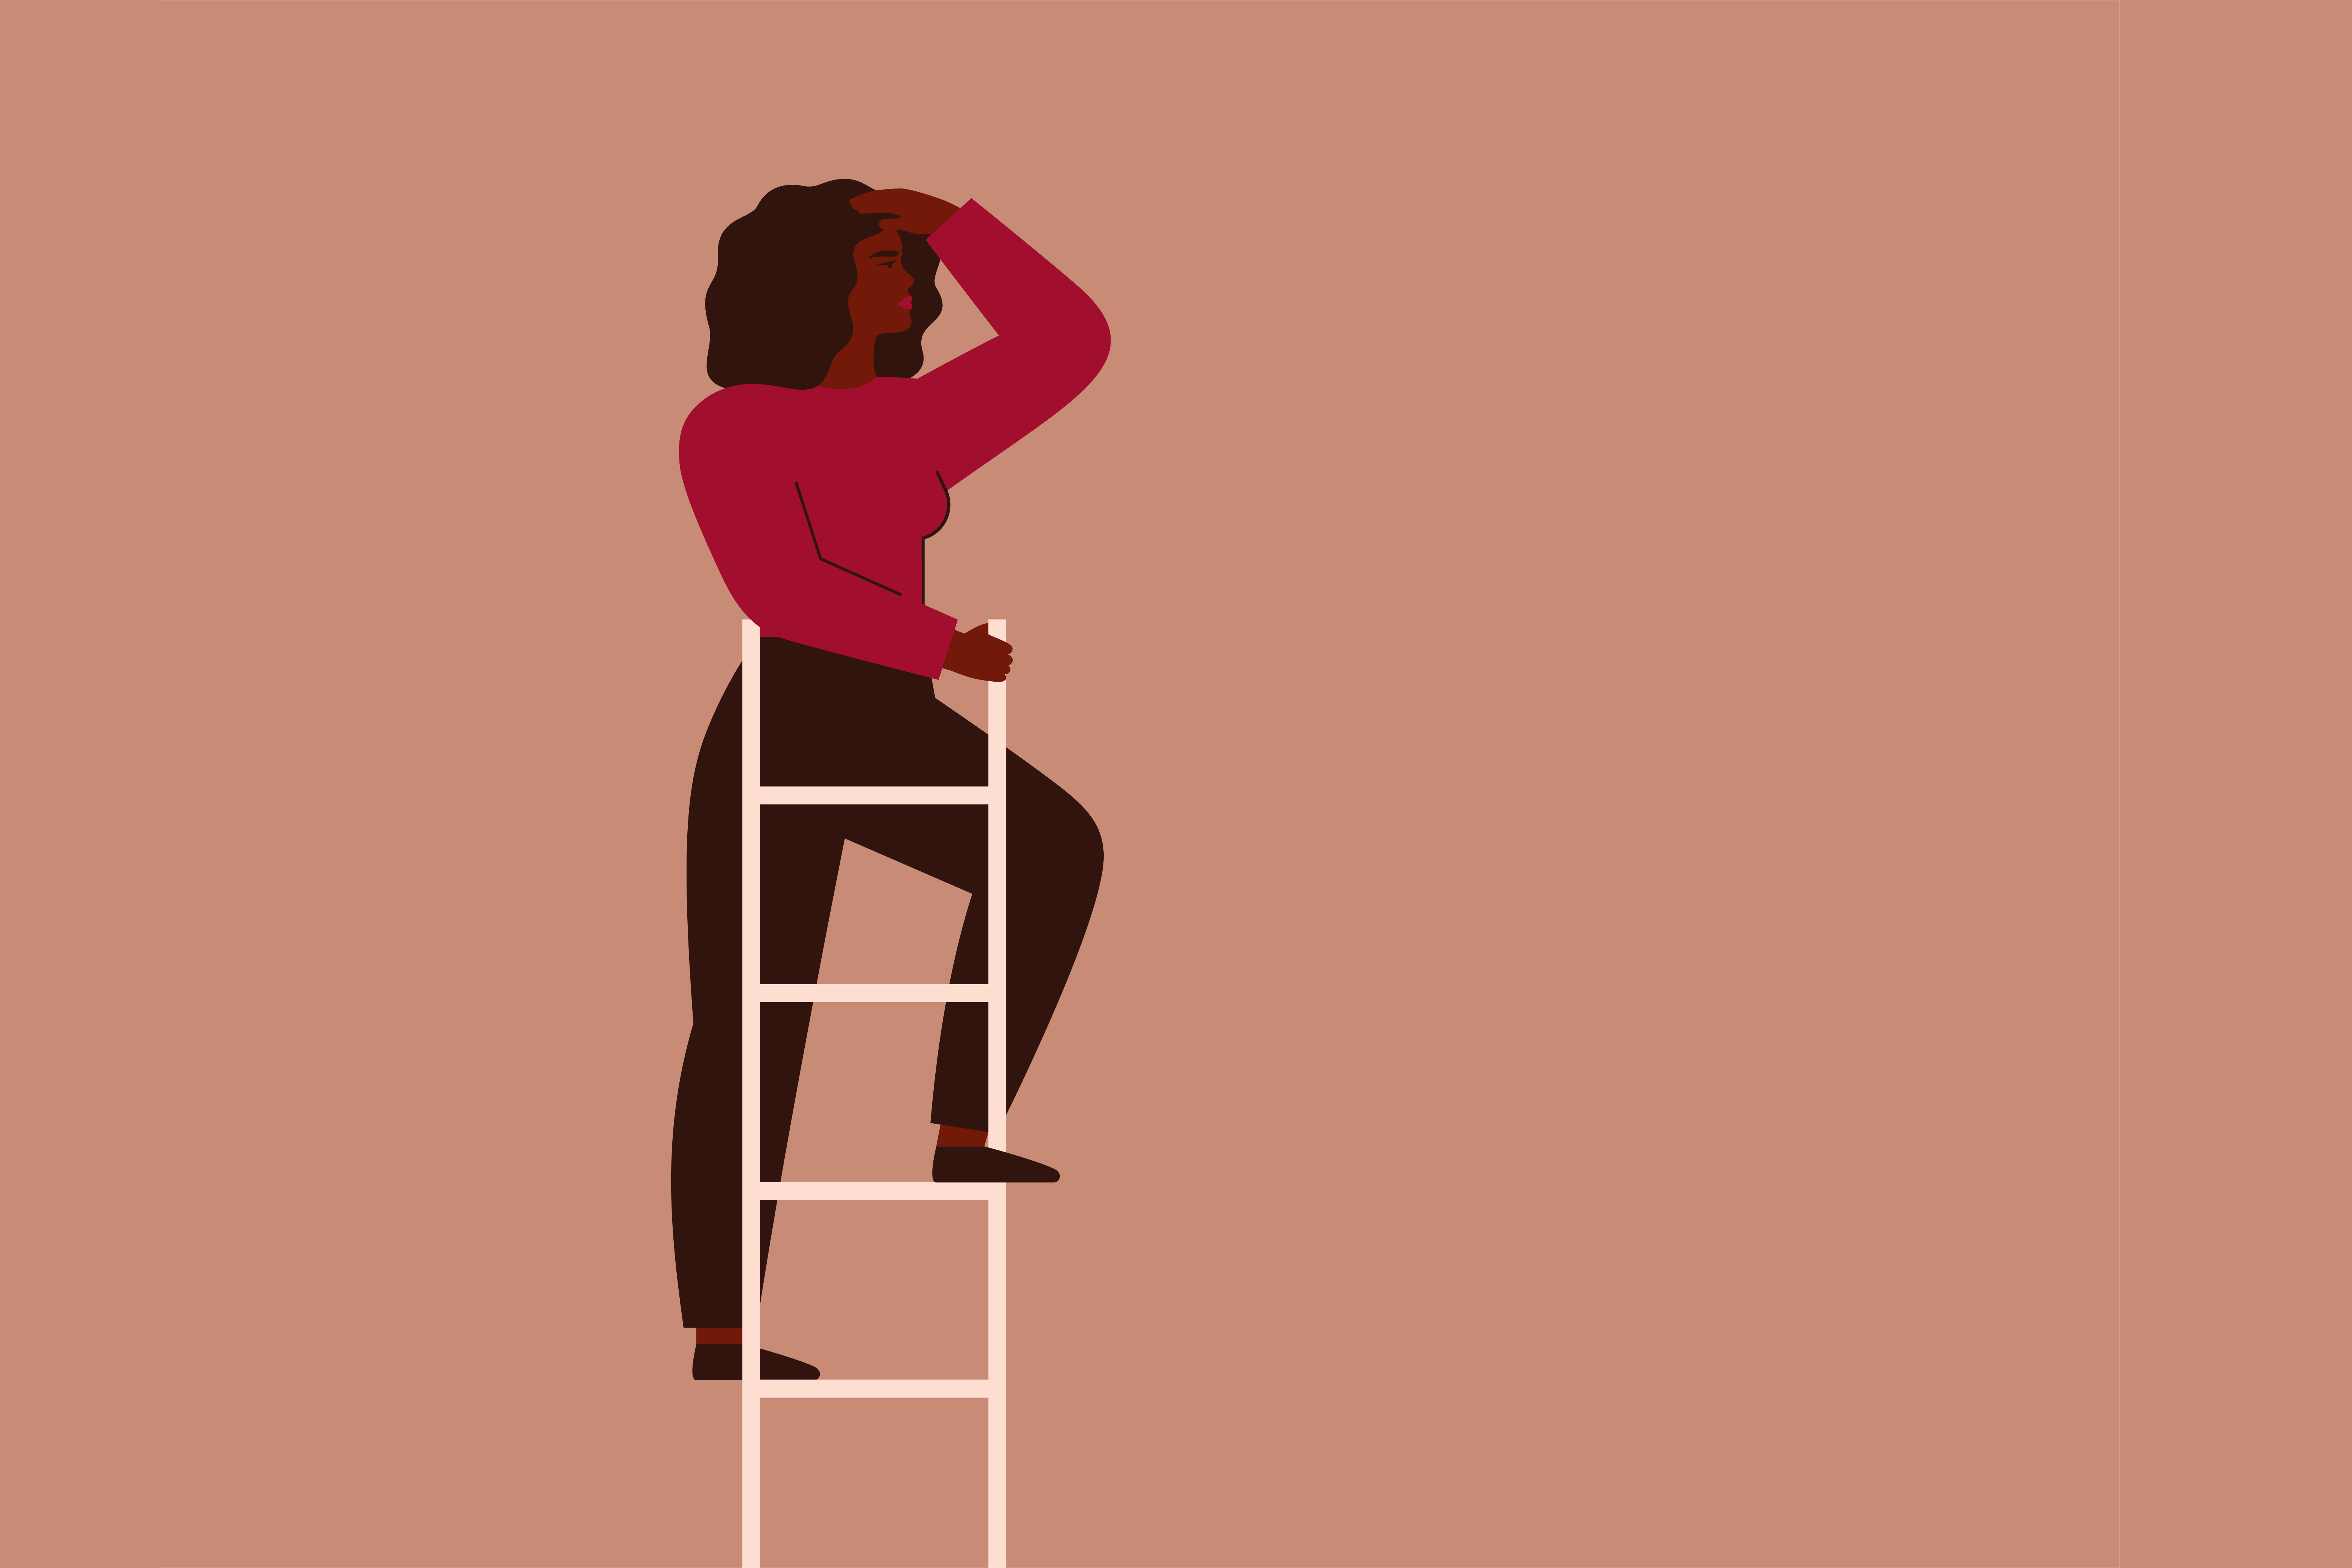 An illustration of a woman looking out from the top of a ladder.